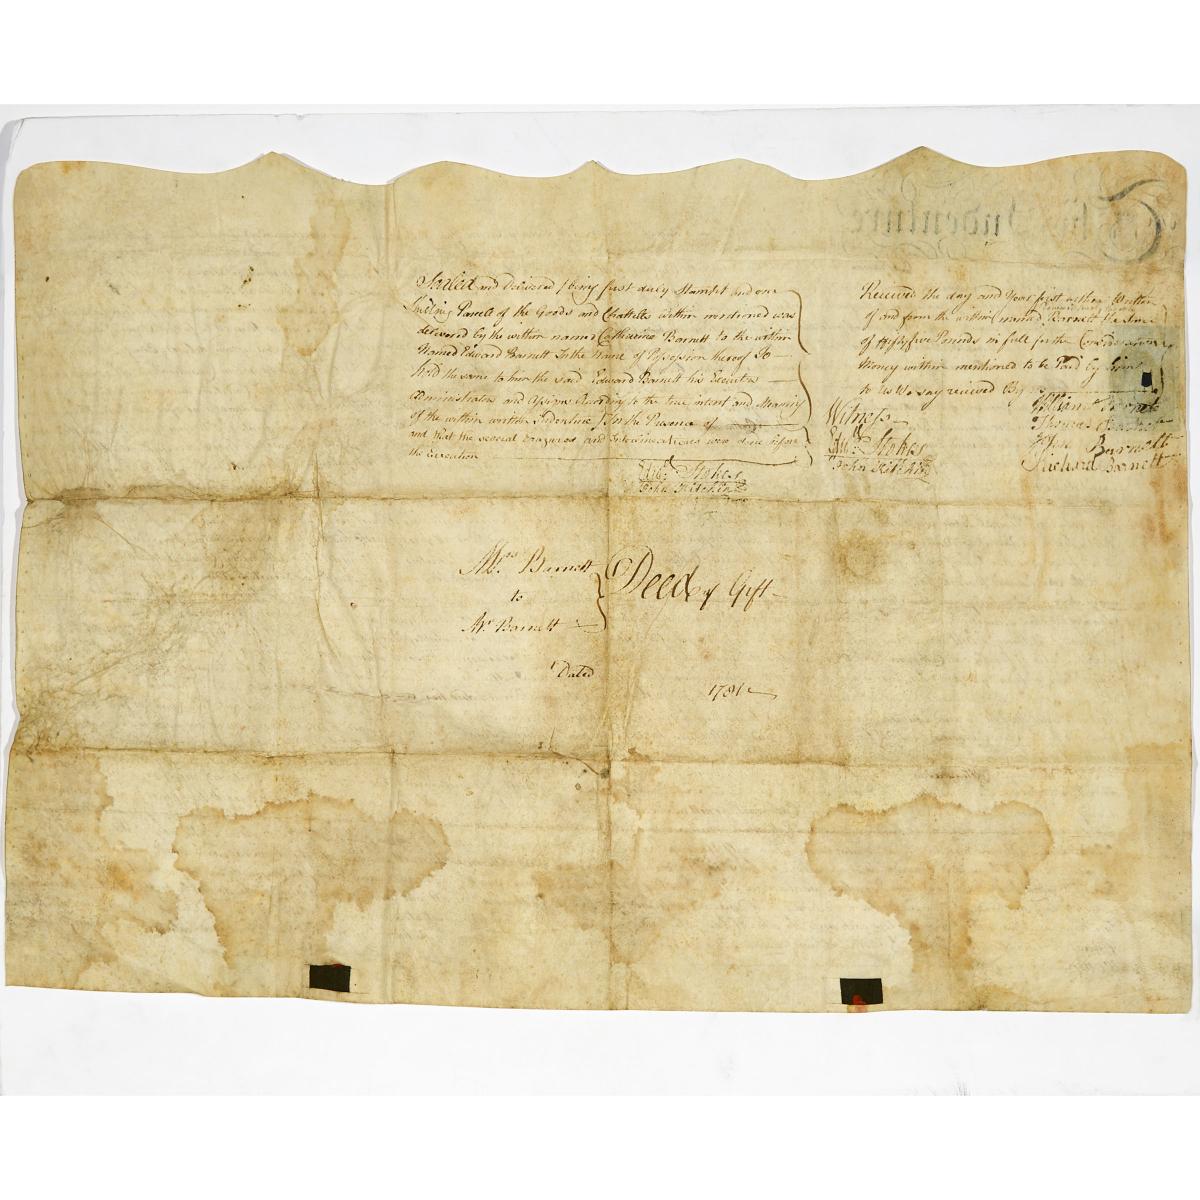 Two Georgian English Indentures , 1742 and 1782, larger 27 x 30.5 in — 68.6 x 77.5 cm (2 Pieces) - Image 4 of 4